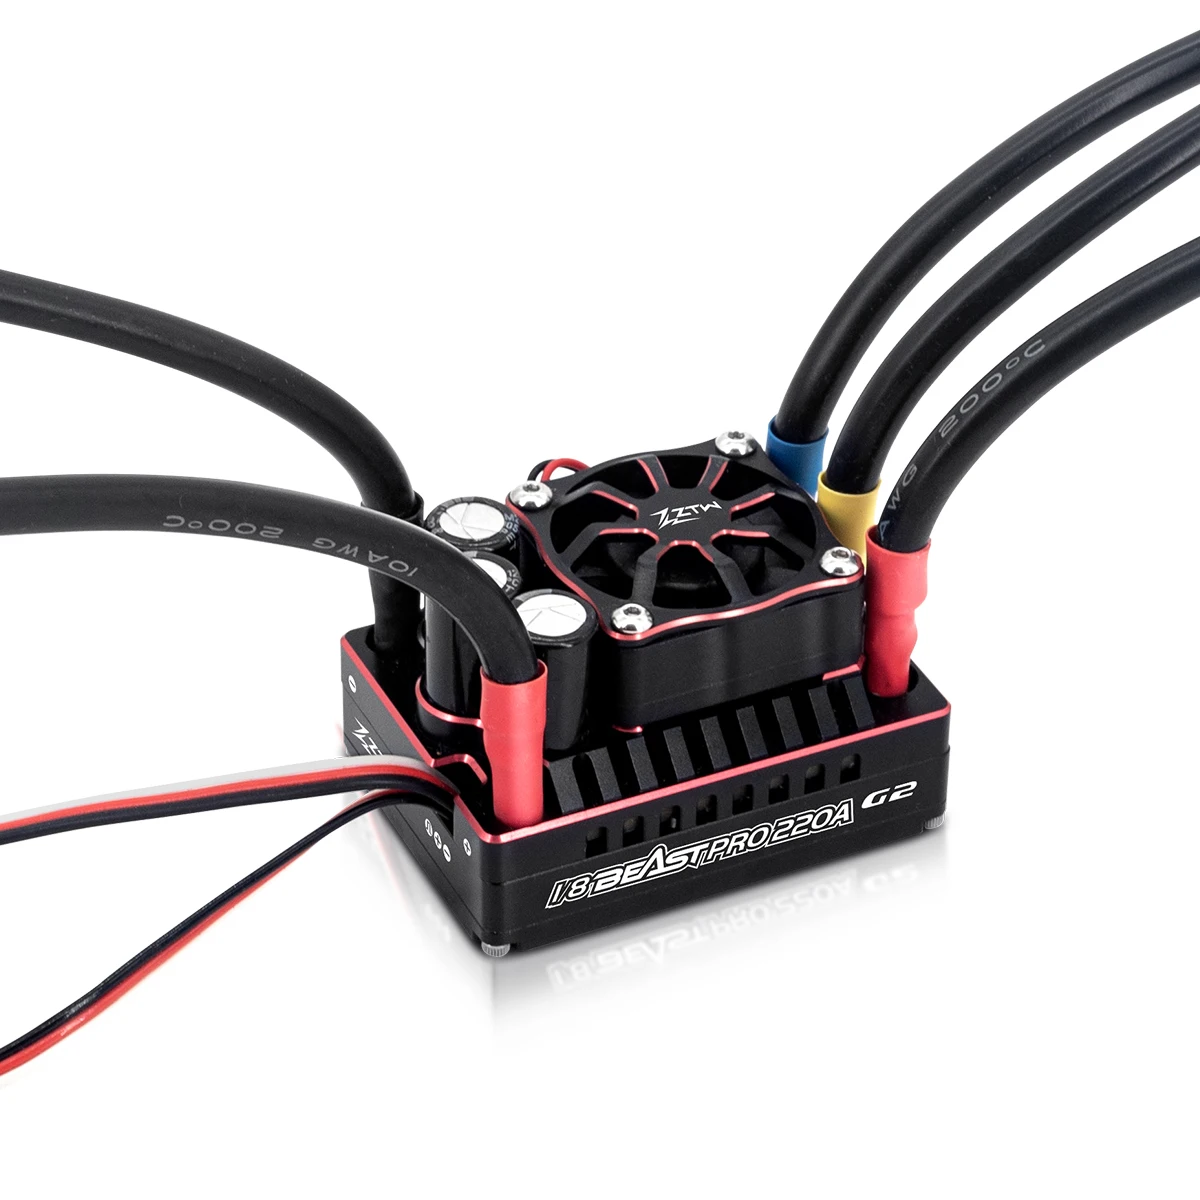 

ZTW Beast PRO 220A G2 ESC adjustable 6.0V/7.4V 6A BEC Brushless Speed Controller For 1/8 RC Racing Car Truck Off-road